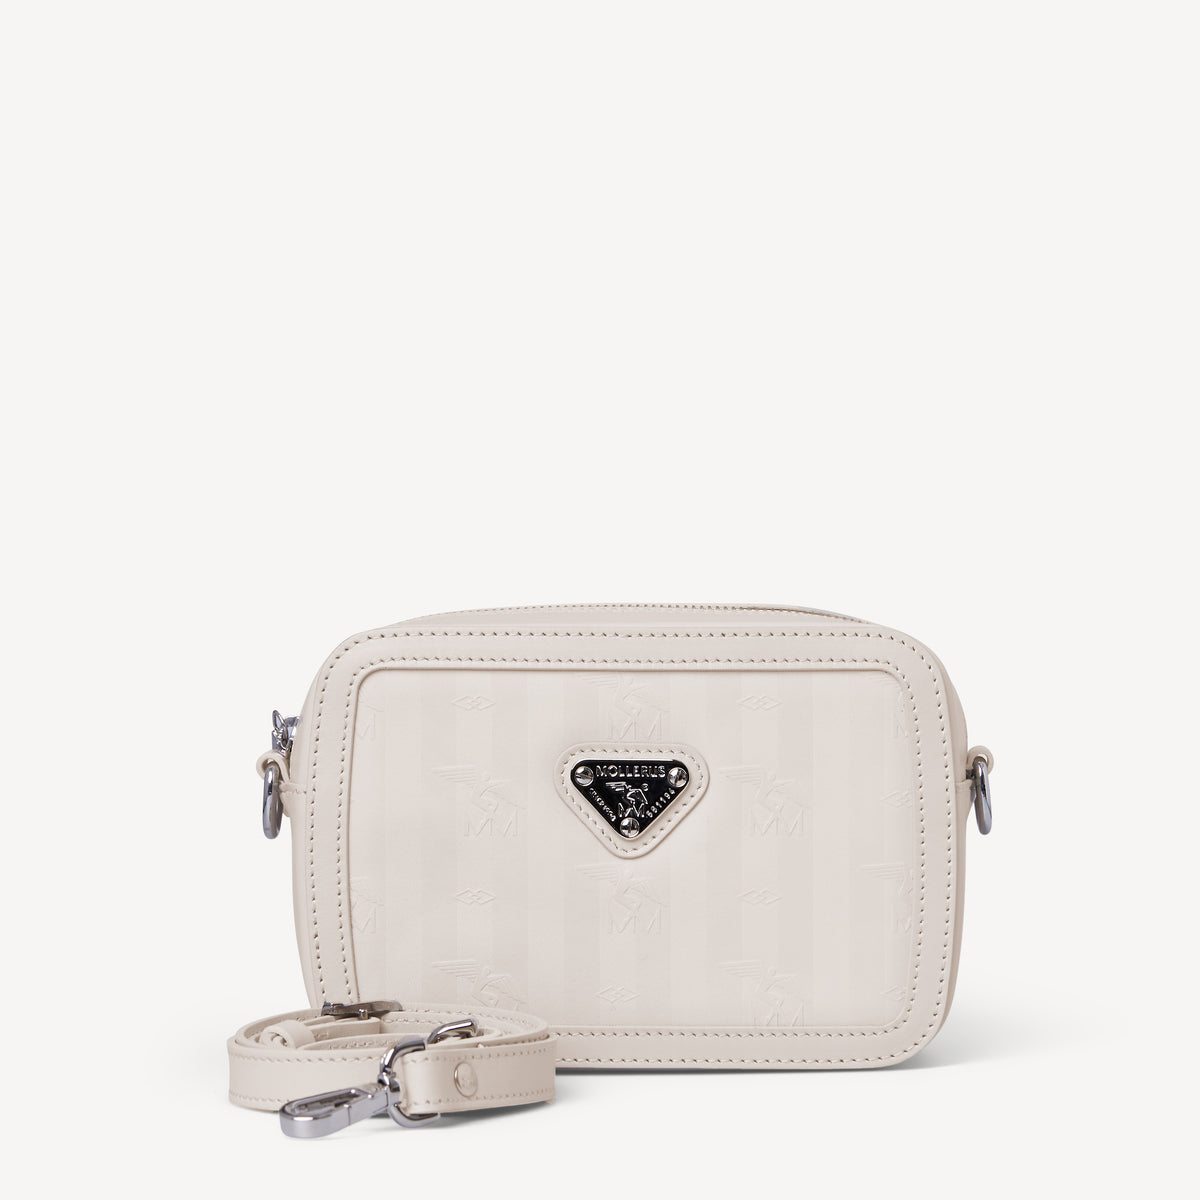 INWIL | Schultertasche pearl weiss/silber - FRONTAL